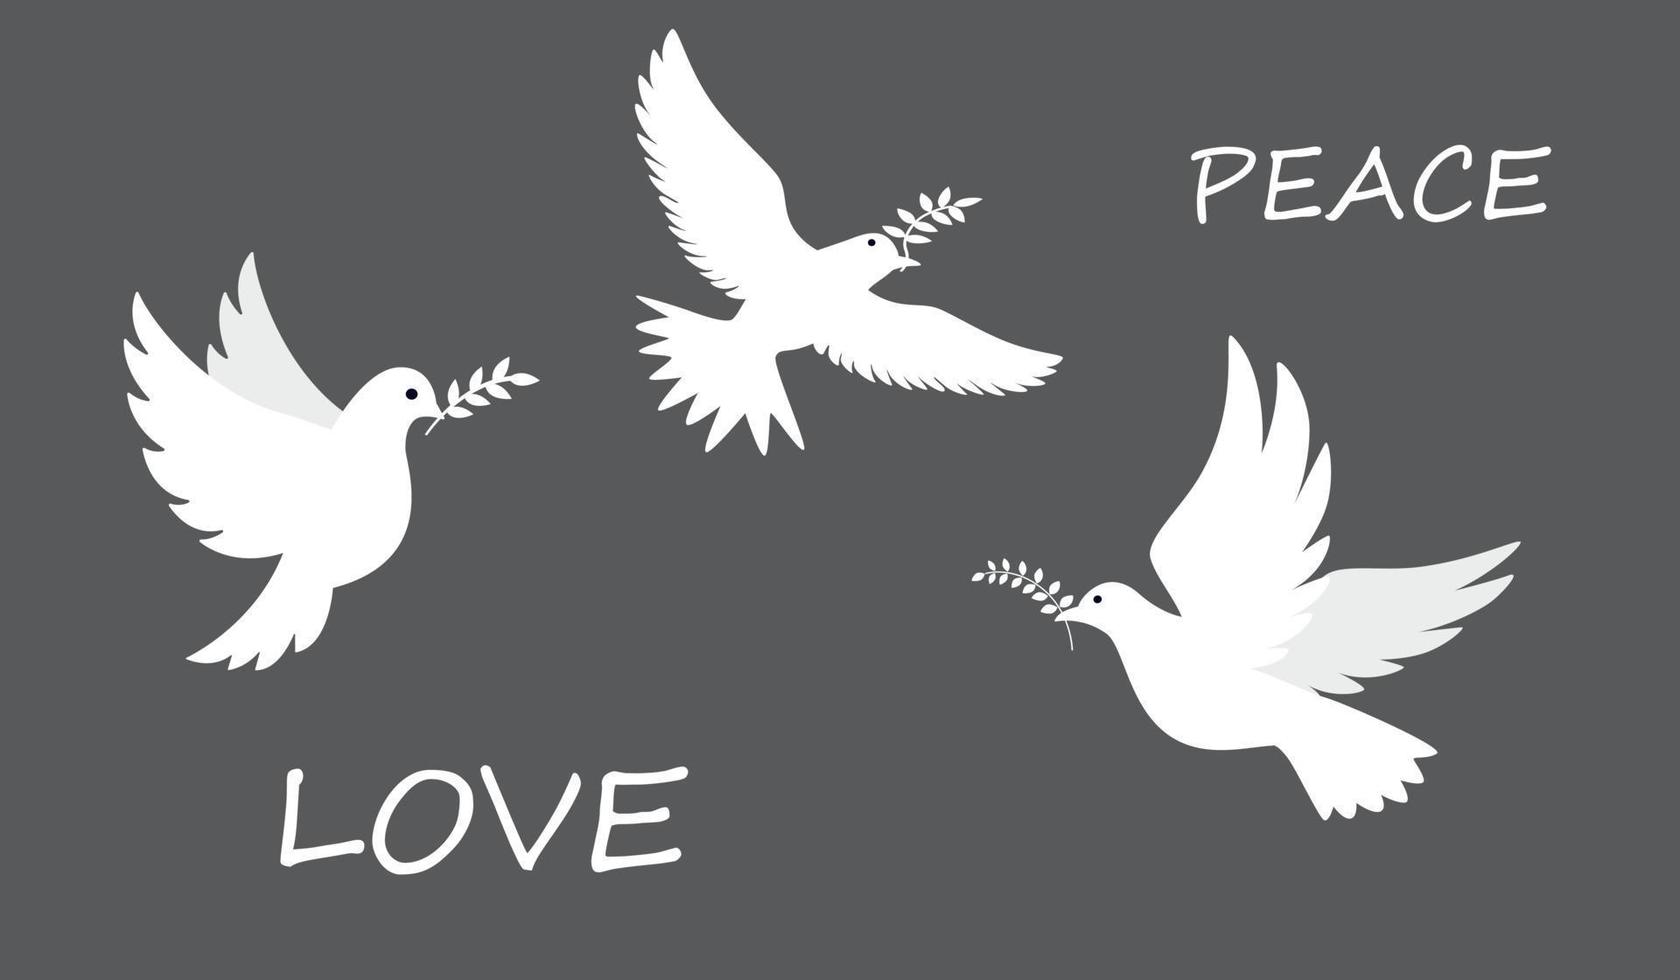 Dove of peace. Flying and standing Birds with an olive branches. Peace and love, freedom, no war concept. Hand drawn modern Vector illustration. All elements are isolated